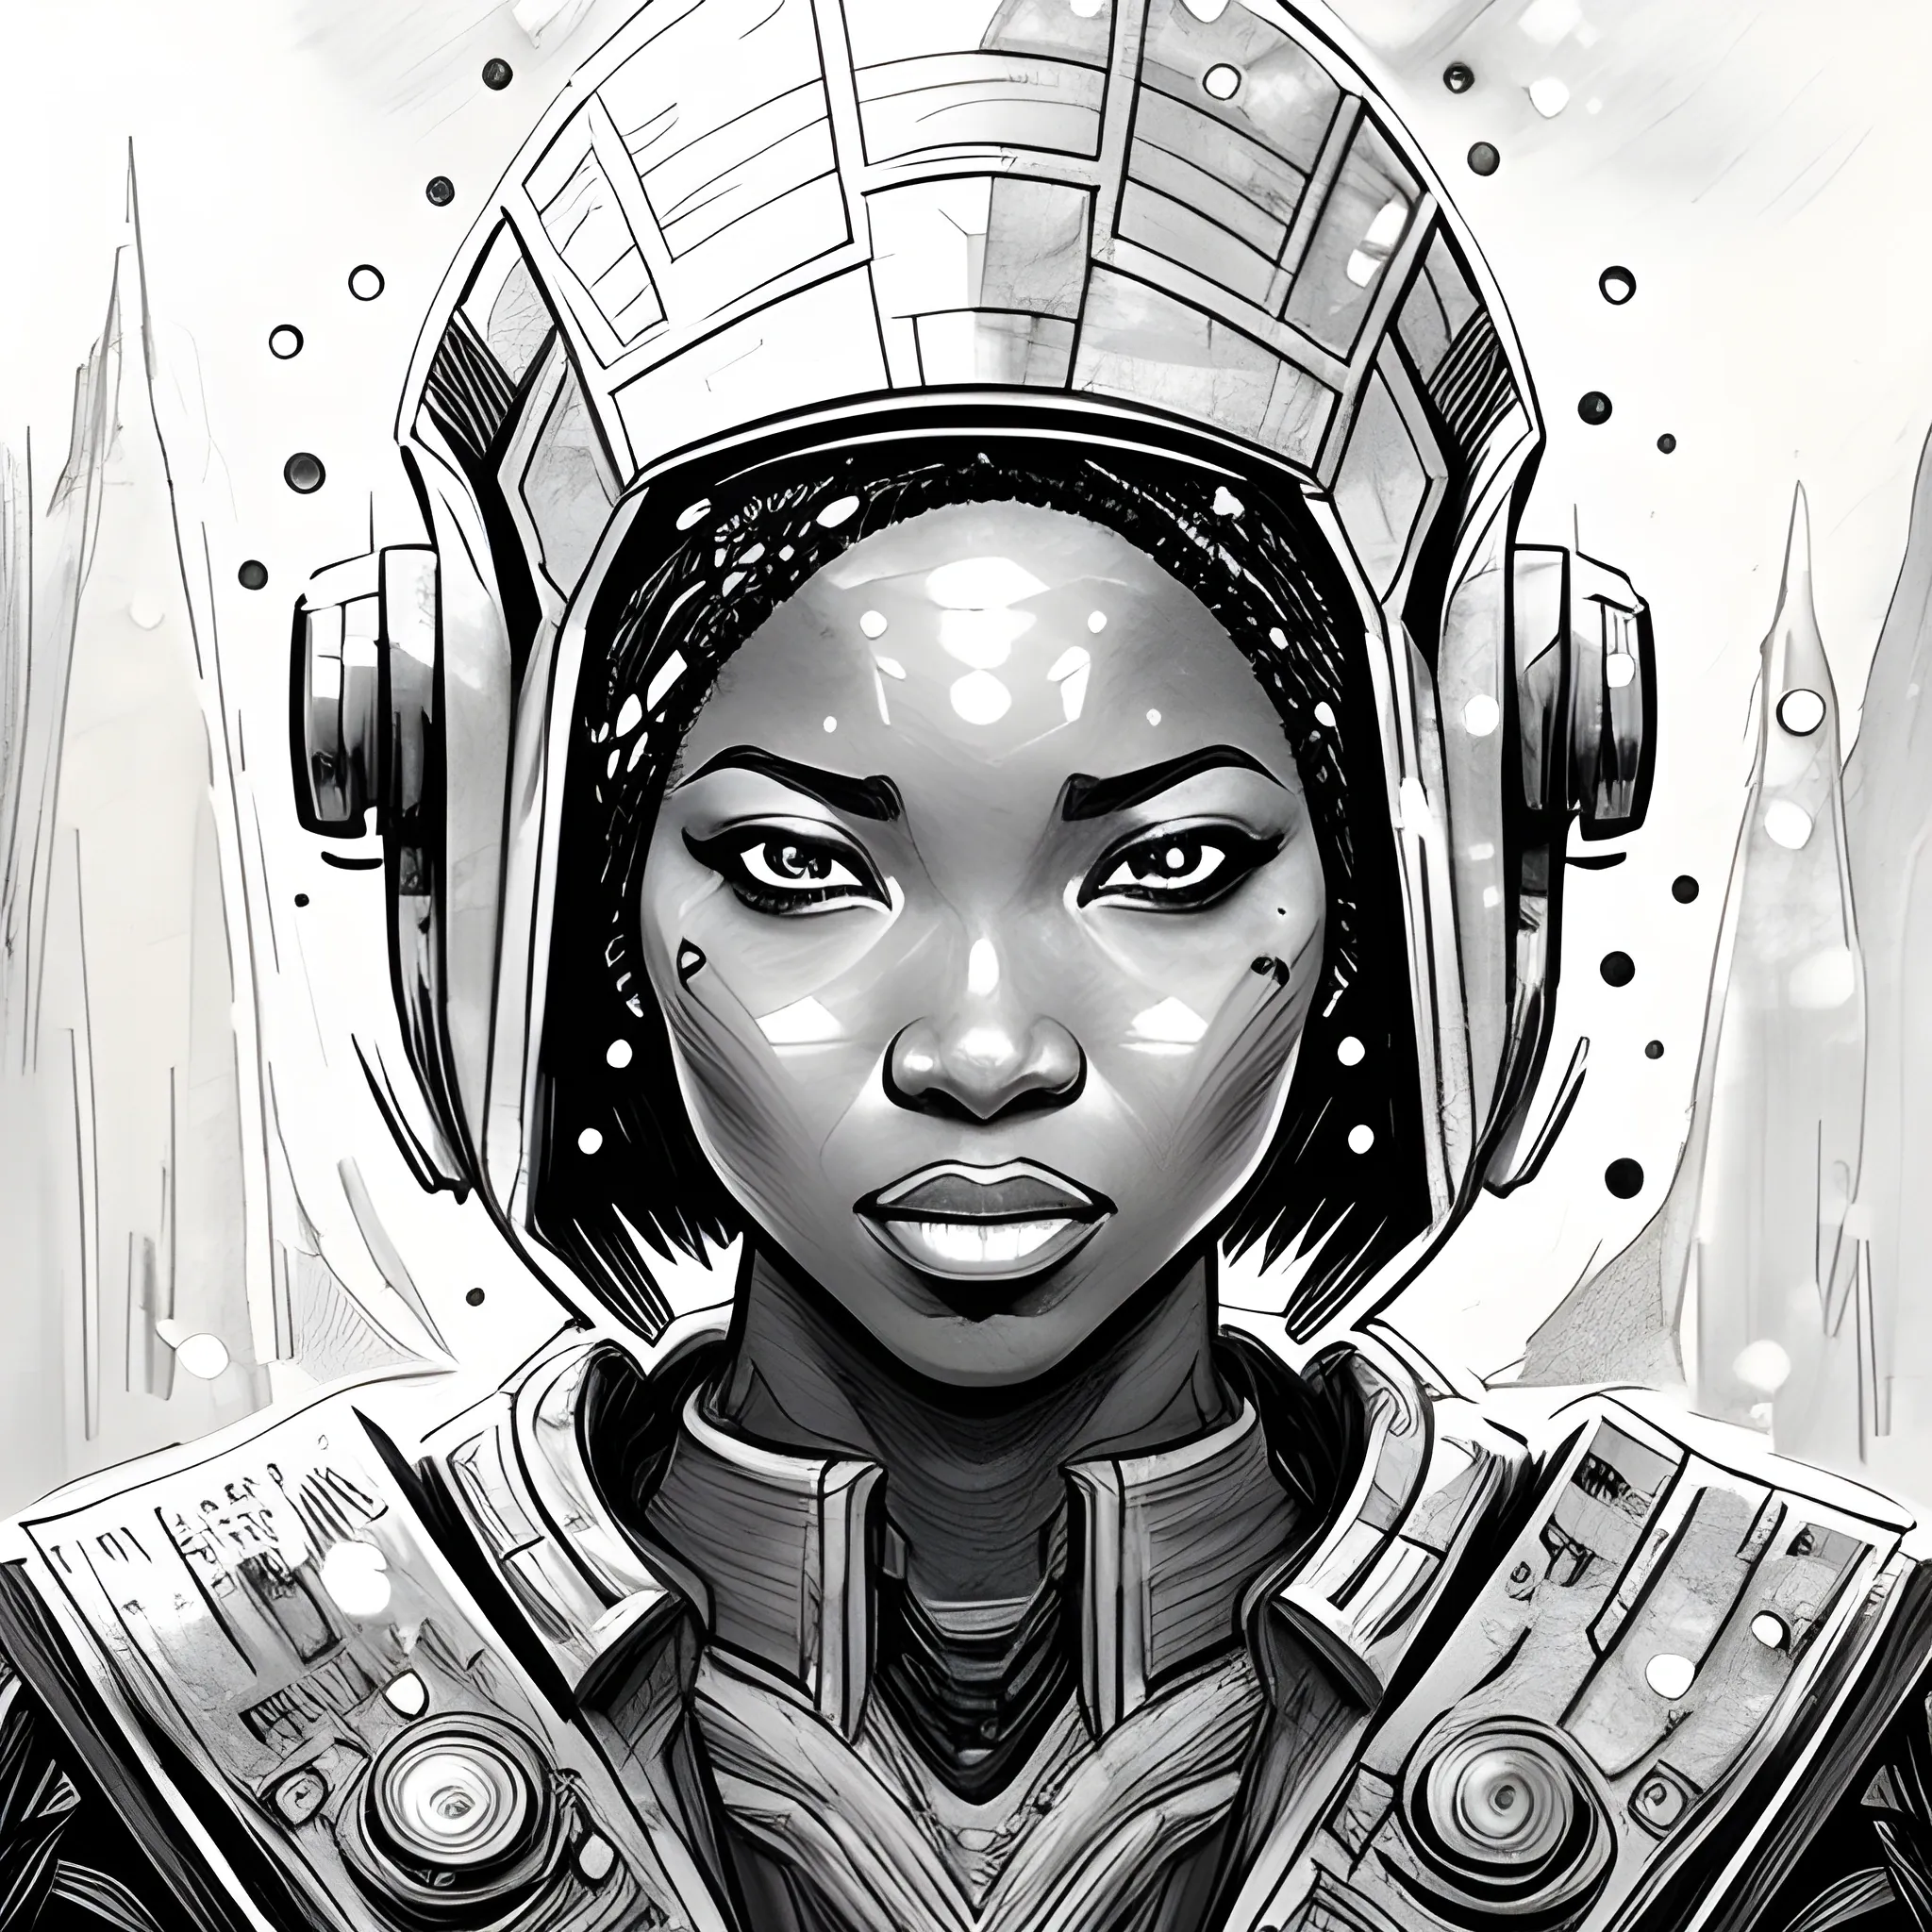 CONCEPT ART, ink sketch with ink wash: Headshot portrait of a gorgeous African starship doctor, sci-fi uniform, snowing in the background = intricate details, classic graphic novel style, impressionistic illustration, 6x9 format, UHD, 4k